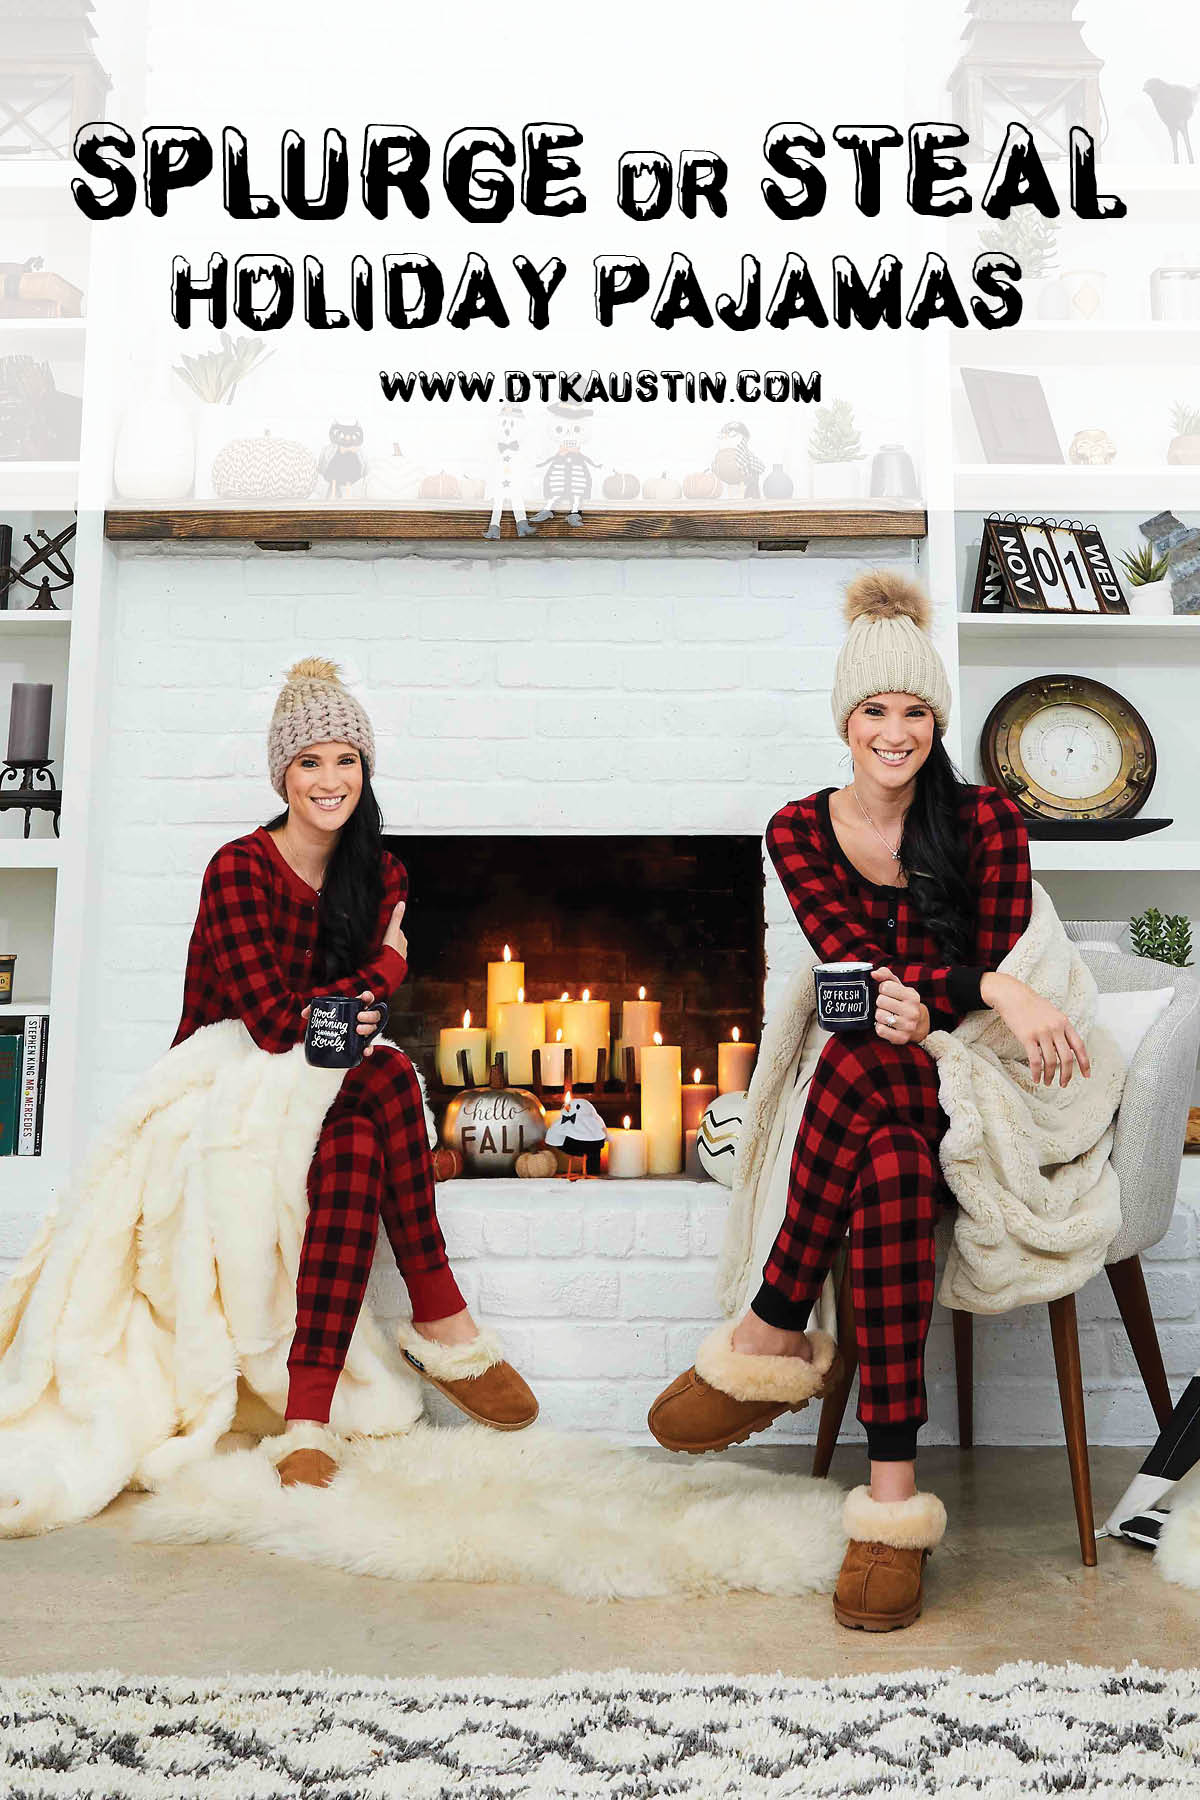 DTKAustin shares her recent Splurge or Steal Column about plaid pajamas in Austin Woman Magazine just in time for winter!